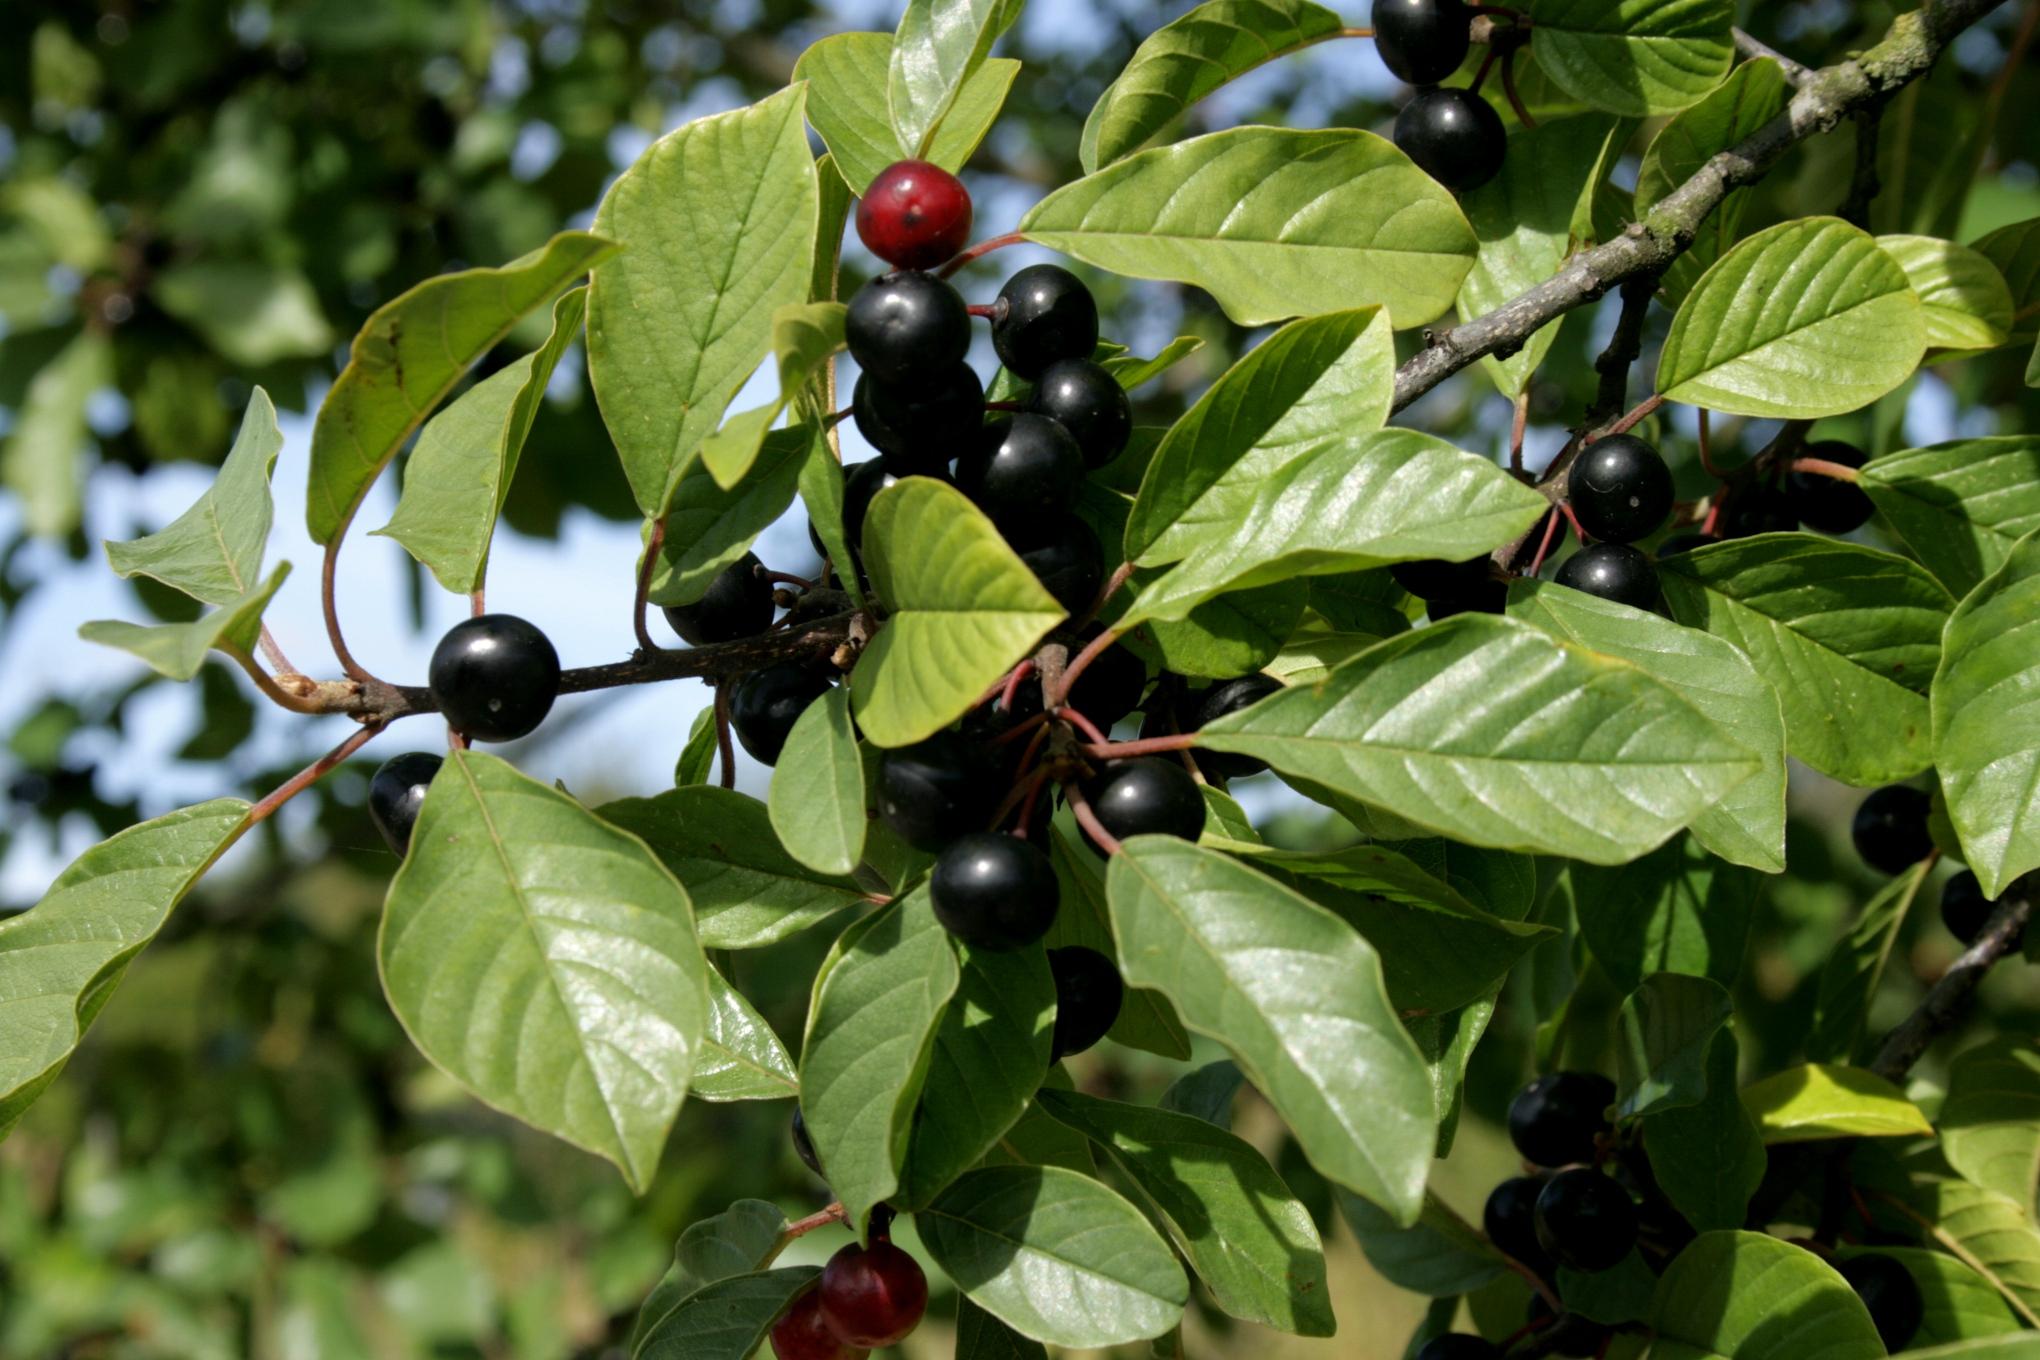 red-black fruits with lime-green leaves, red-green stems and gray-brown branches

